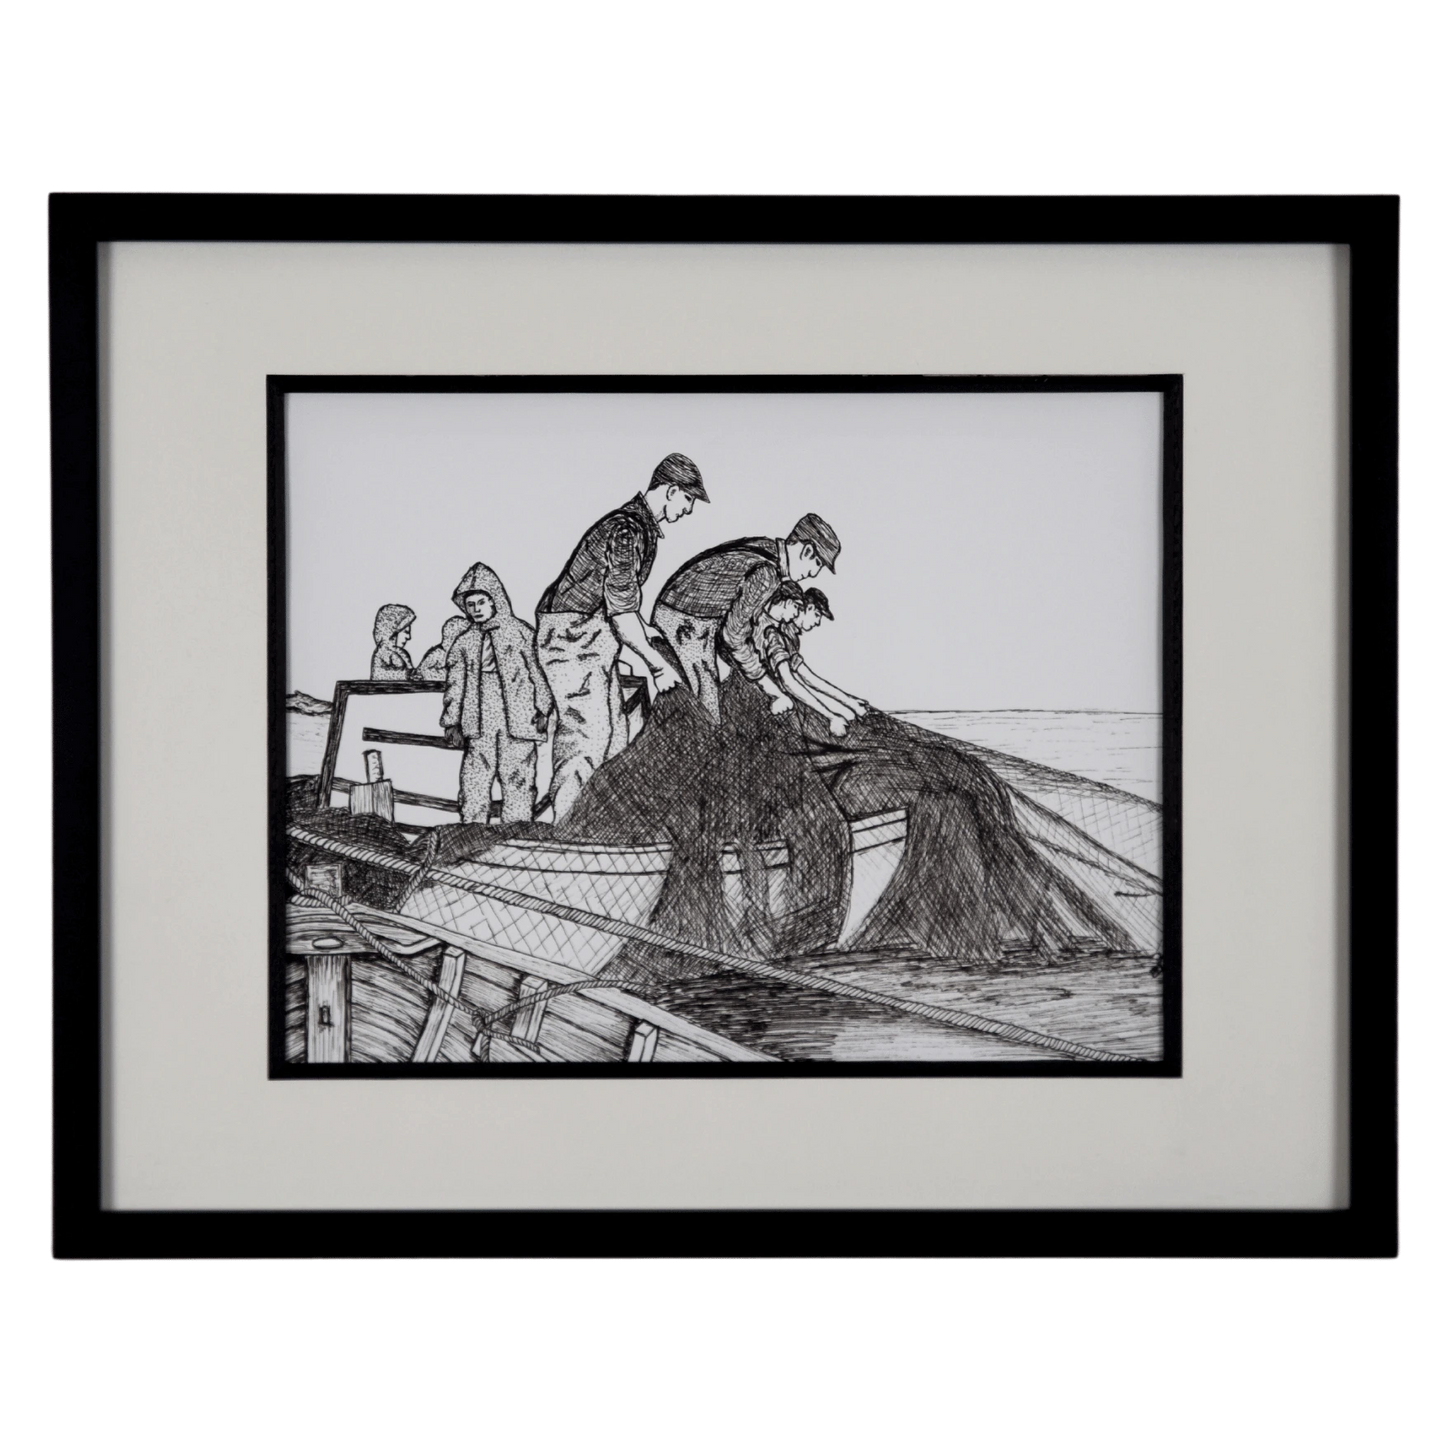 Add a touch of rustic charm with "The Haul" reproduction print. This pen and ink print features fishermen hauling their nets to the boat.